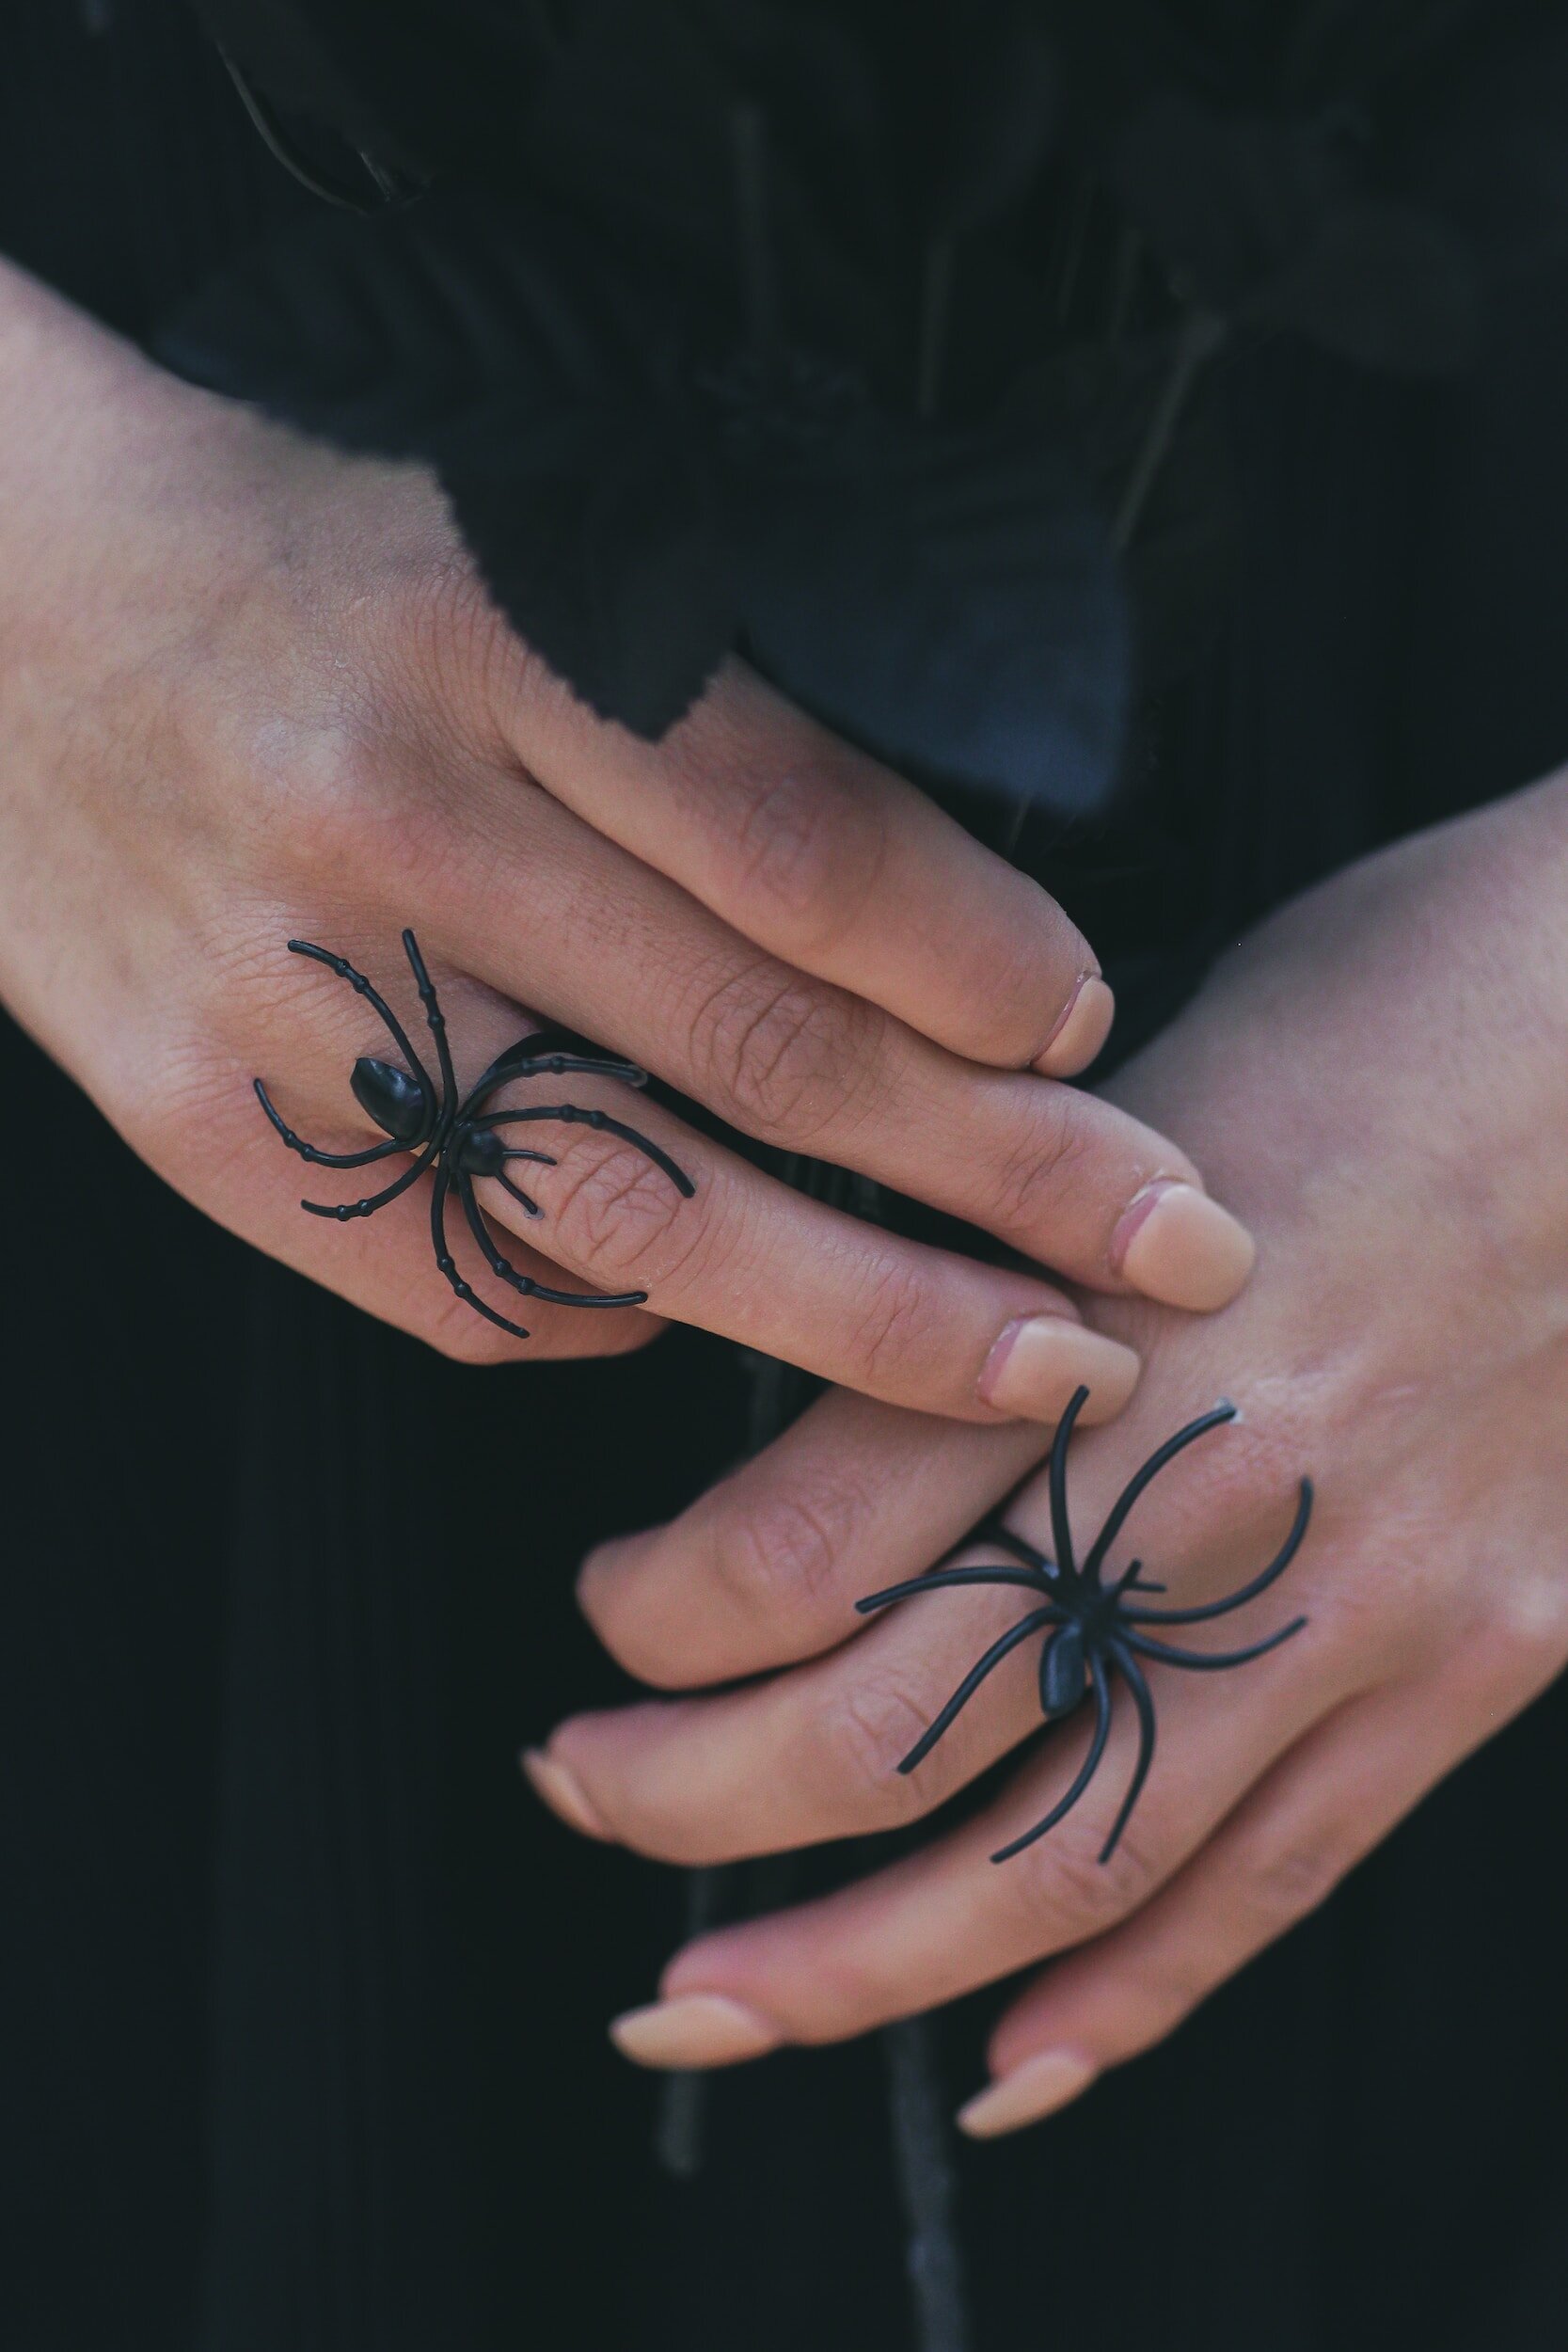 30 Best Spider Tattoo Ideas You Should Check